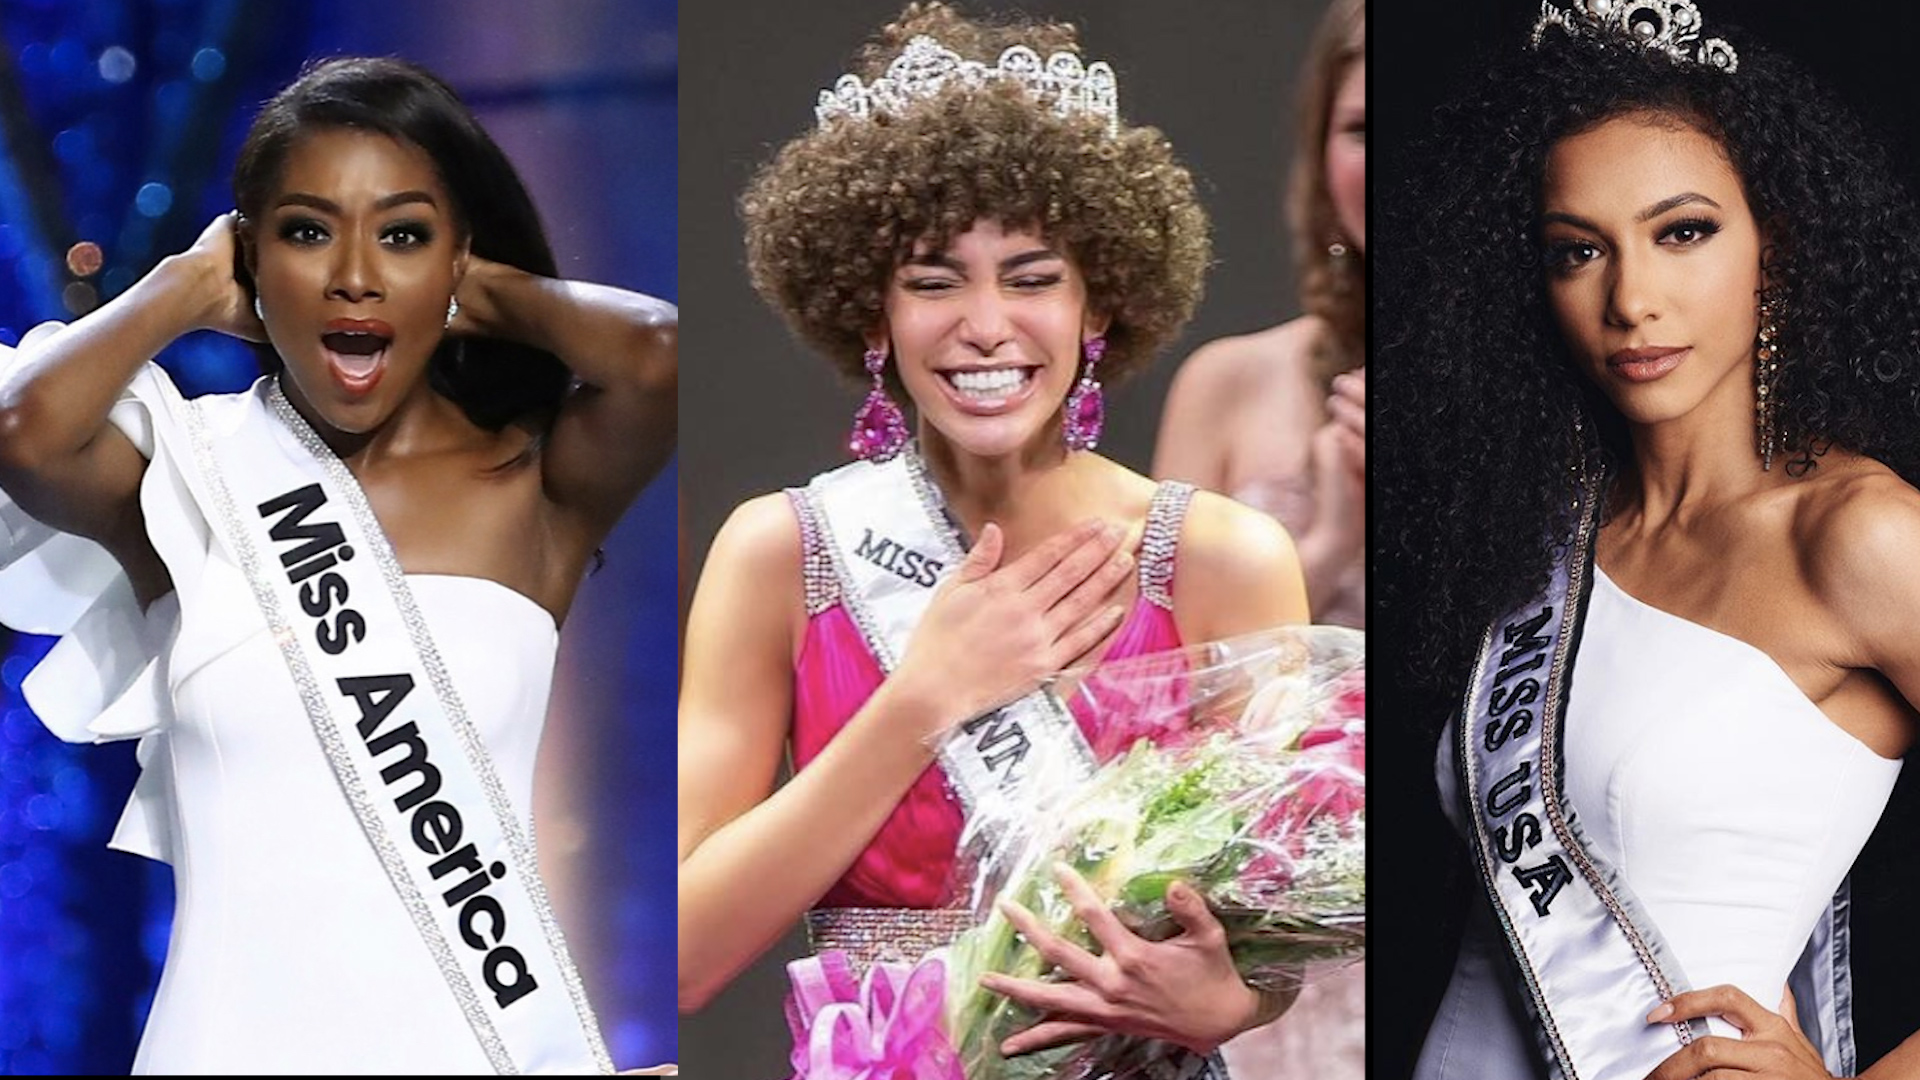 Miss teen usa who - Sex archive